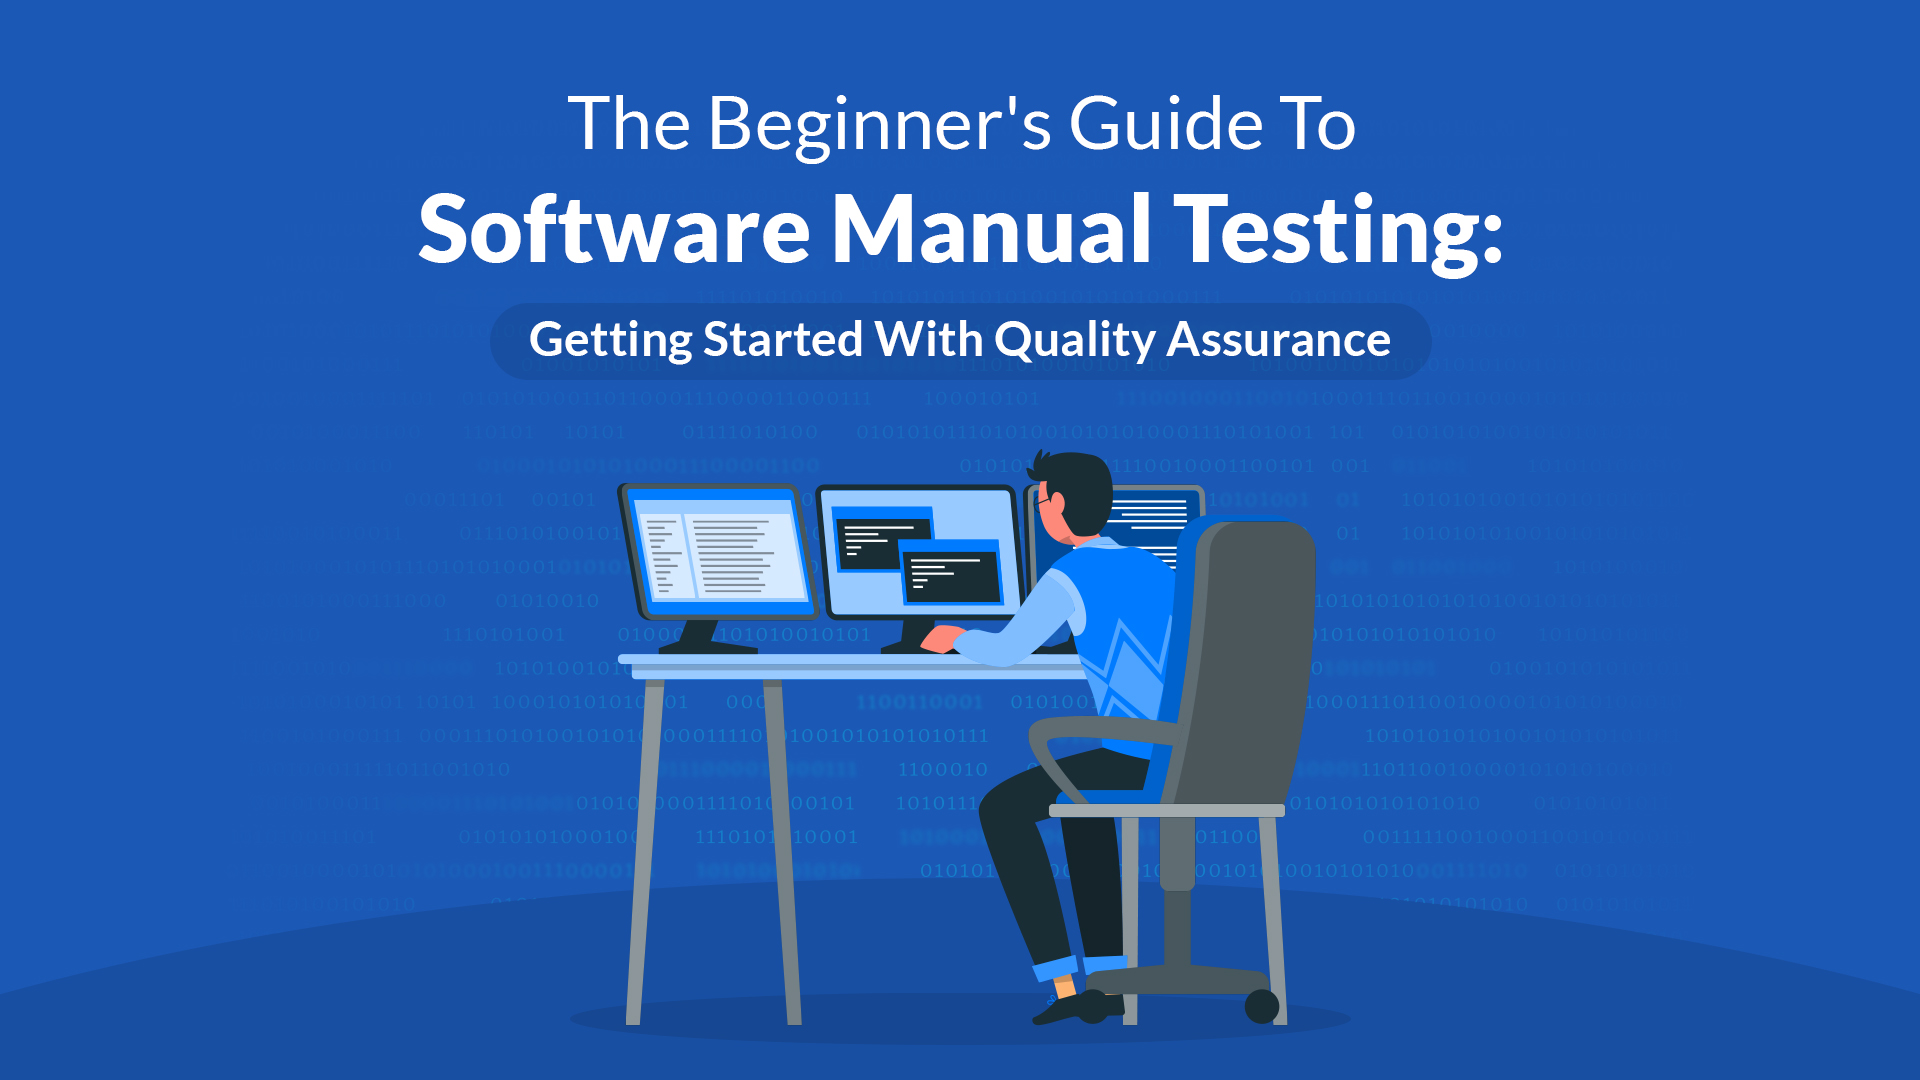 The Beginner's Guide To Software Manual Testing Getting Started With Quality Assurance